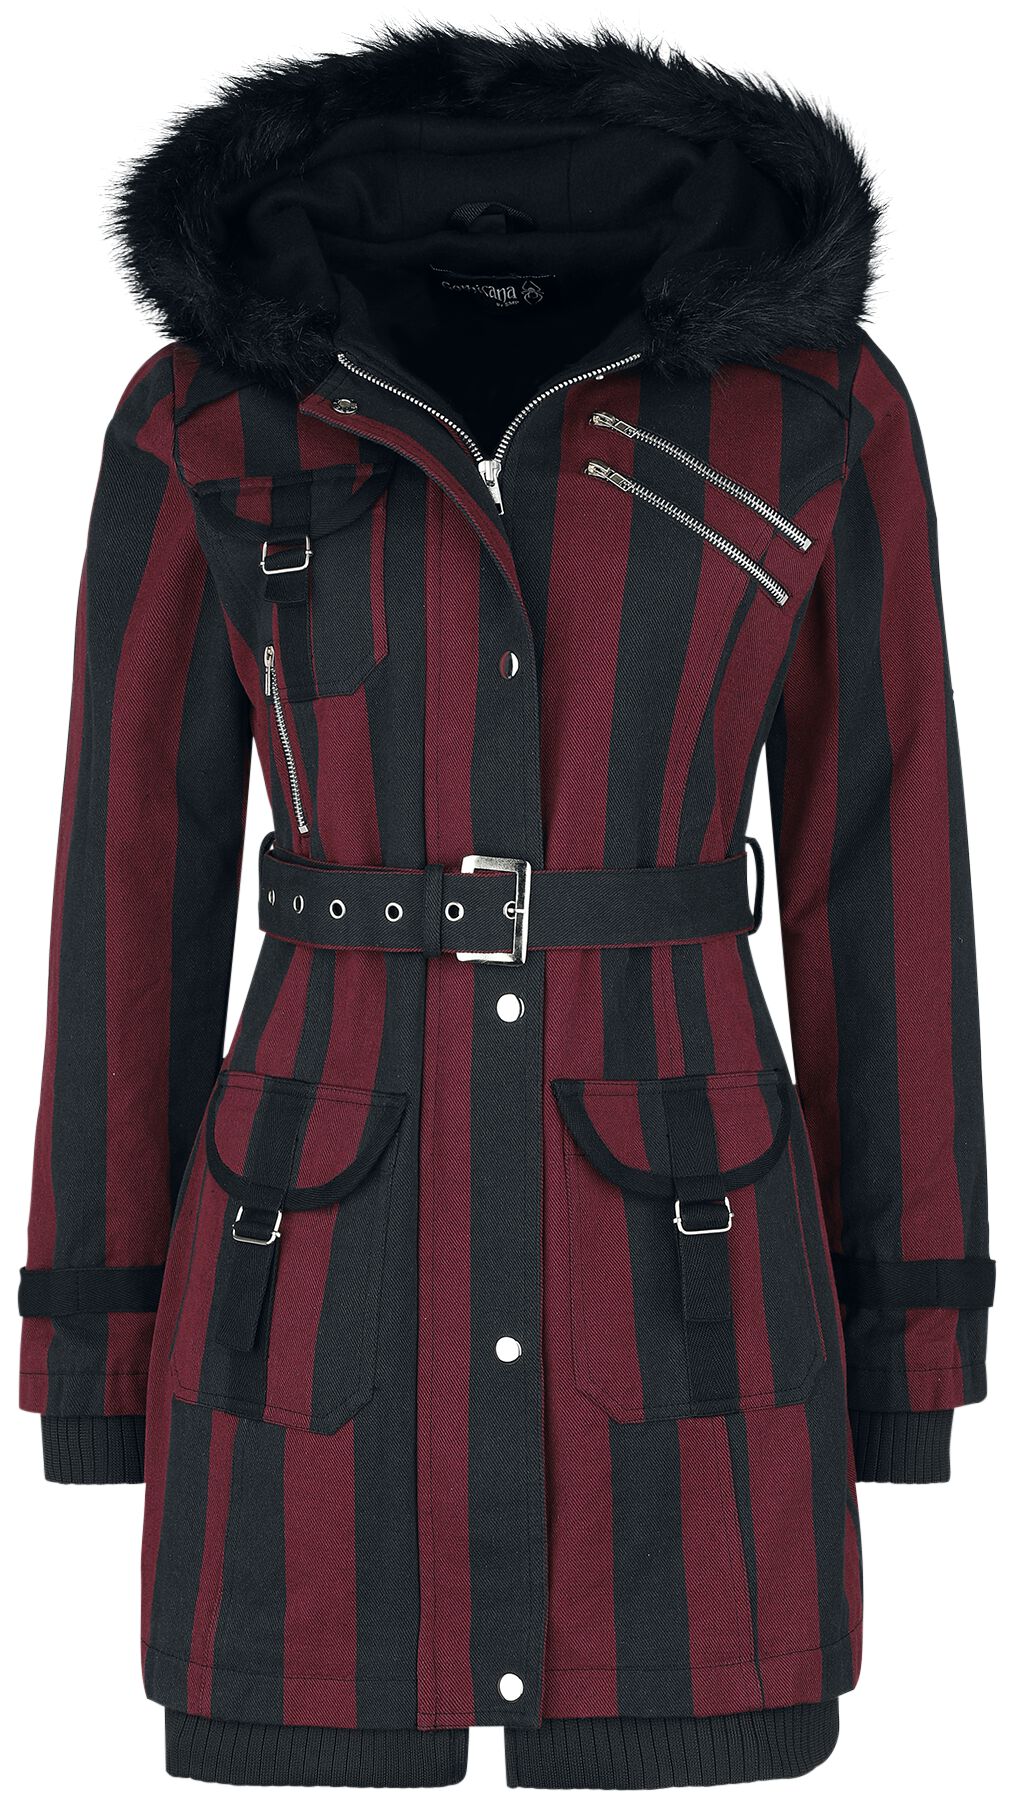 Image of Giacca invernale di Gothicana by EMP - Multi Pocket Jacket - XS a 5XL - Donna - nero/rosso